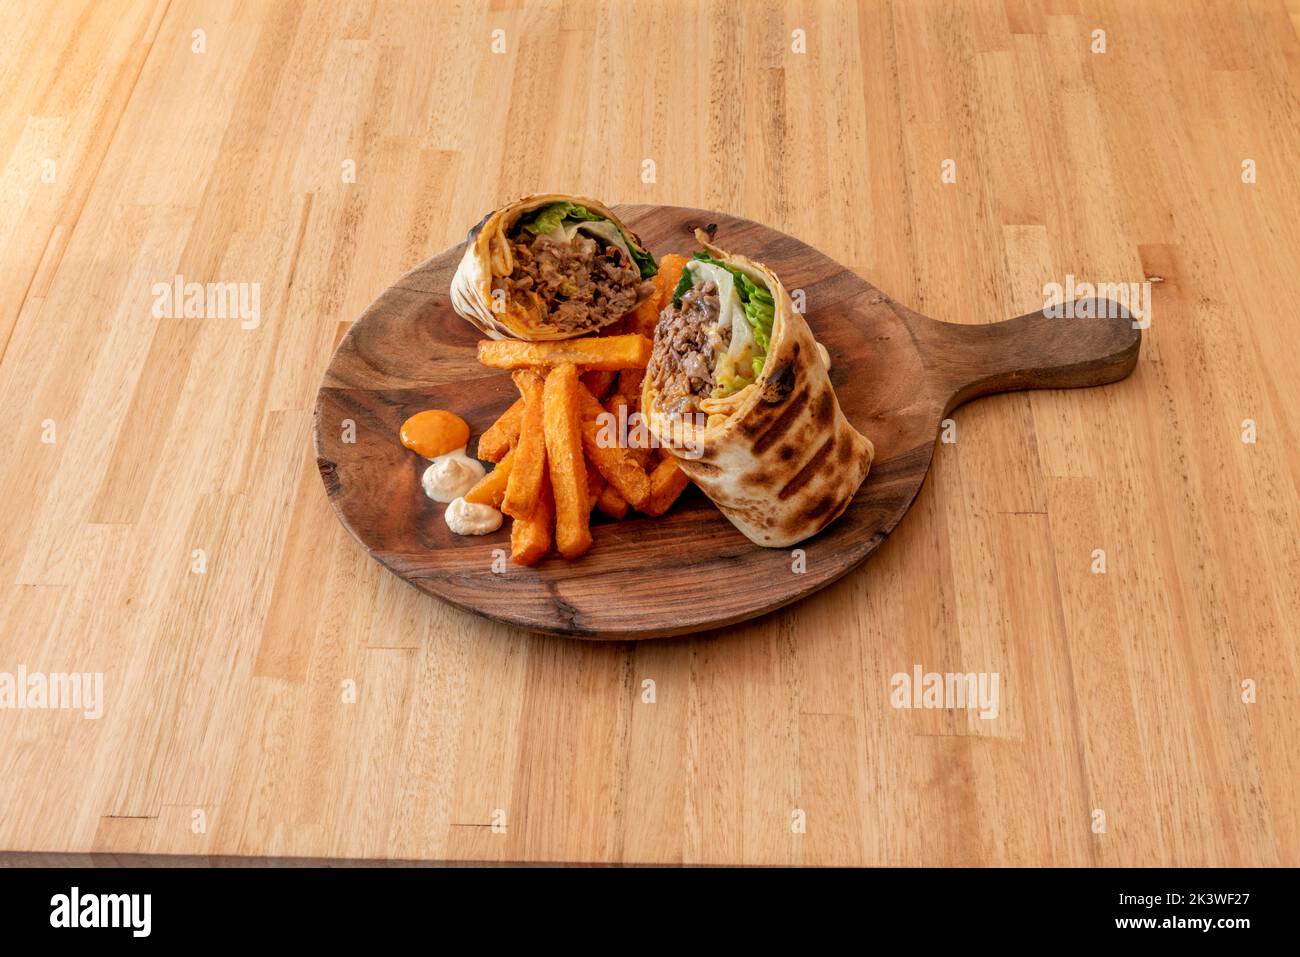 Wheat tortilla stuffed with lamb kebab with lettuce and fried sweet potatoes Stock Photo